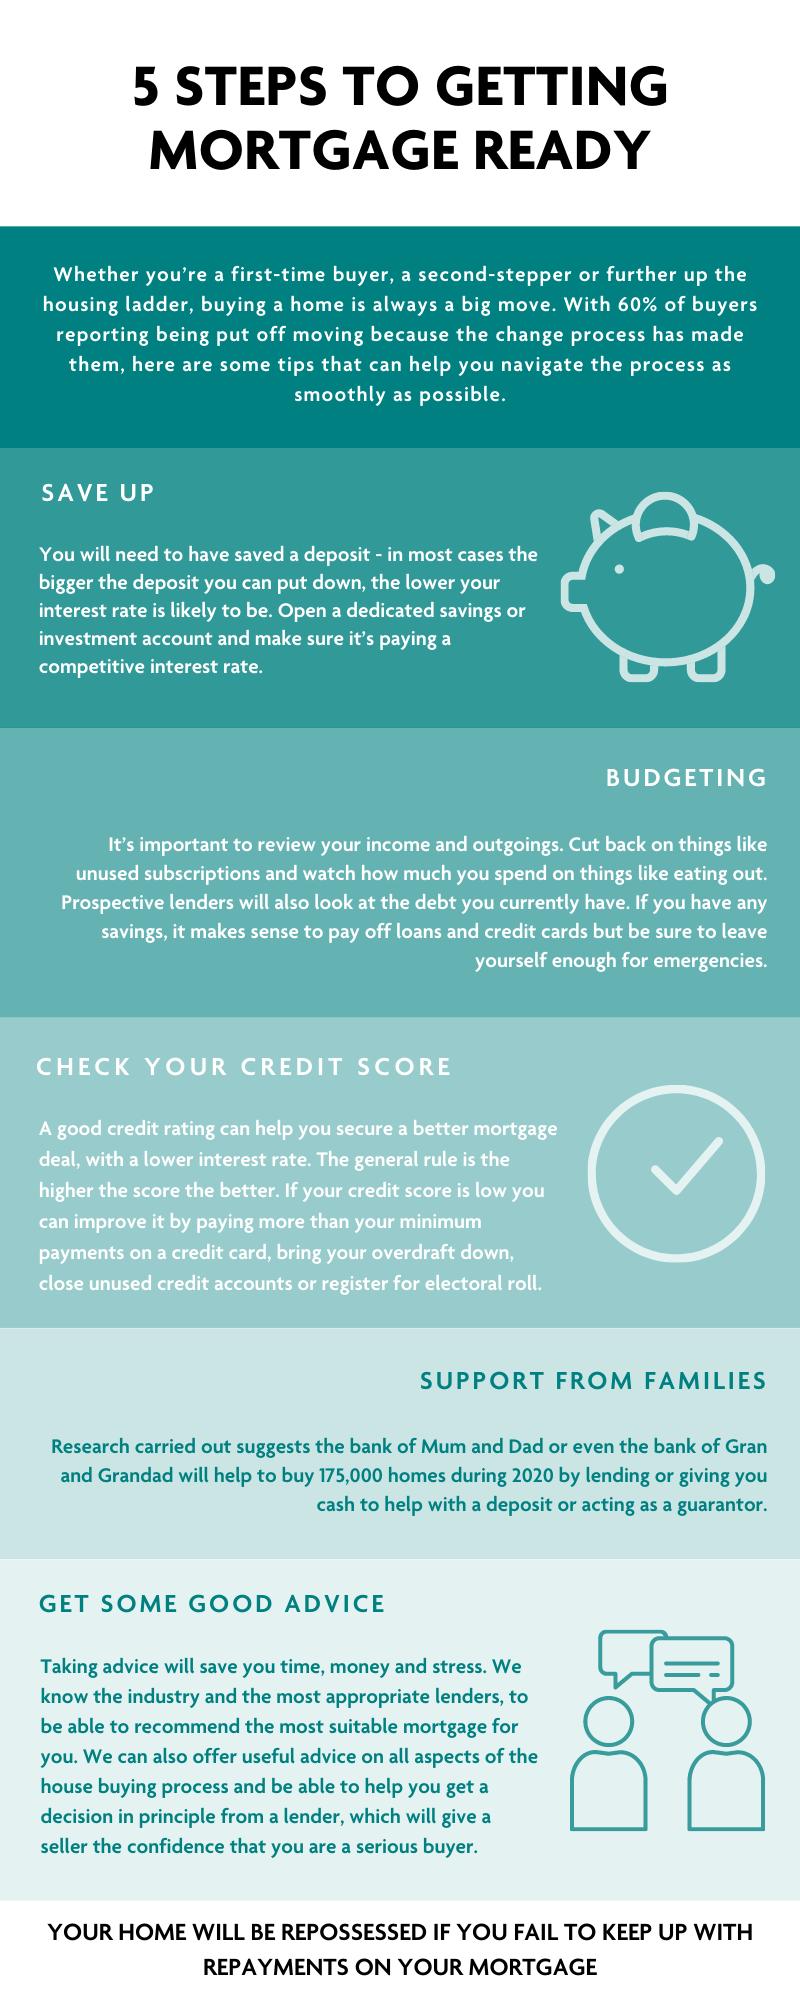 5 Steps to Getting Mortgage Ready